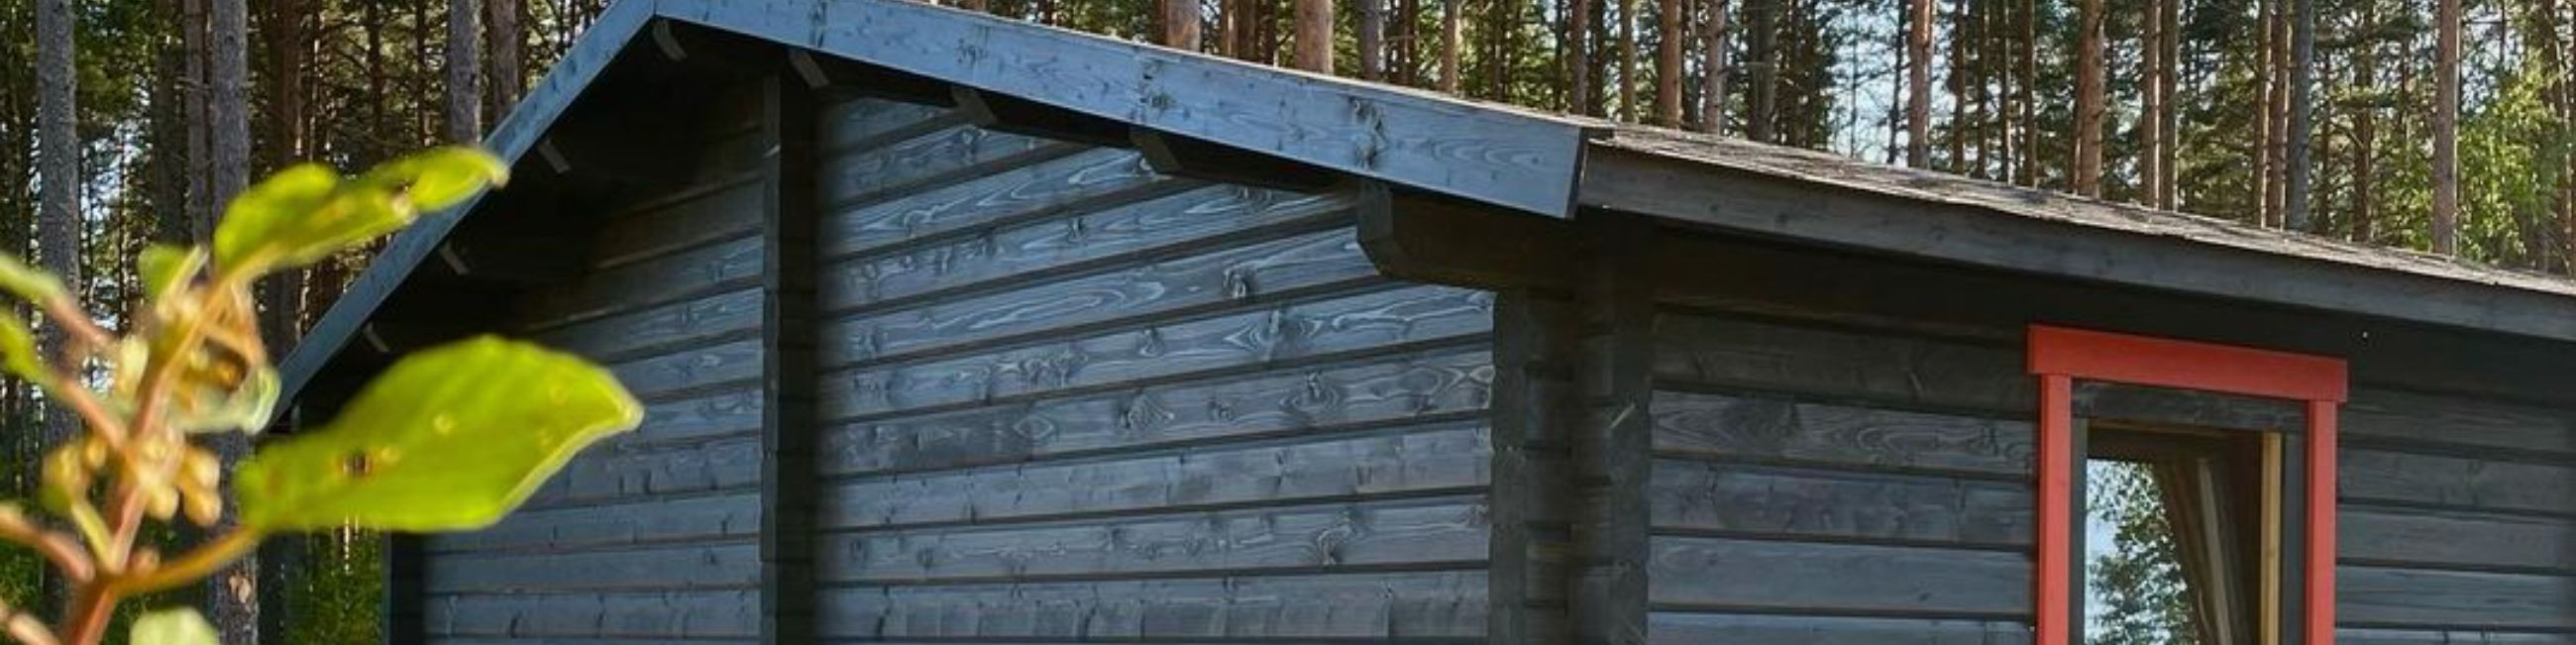 maintenance, Painting, oiling, log houses, Steelwork, protection of wood against weather conditions, weather protection, Wood protection equipment, Coloring, weather resistance